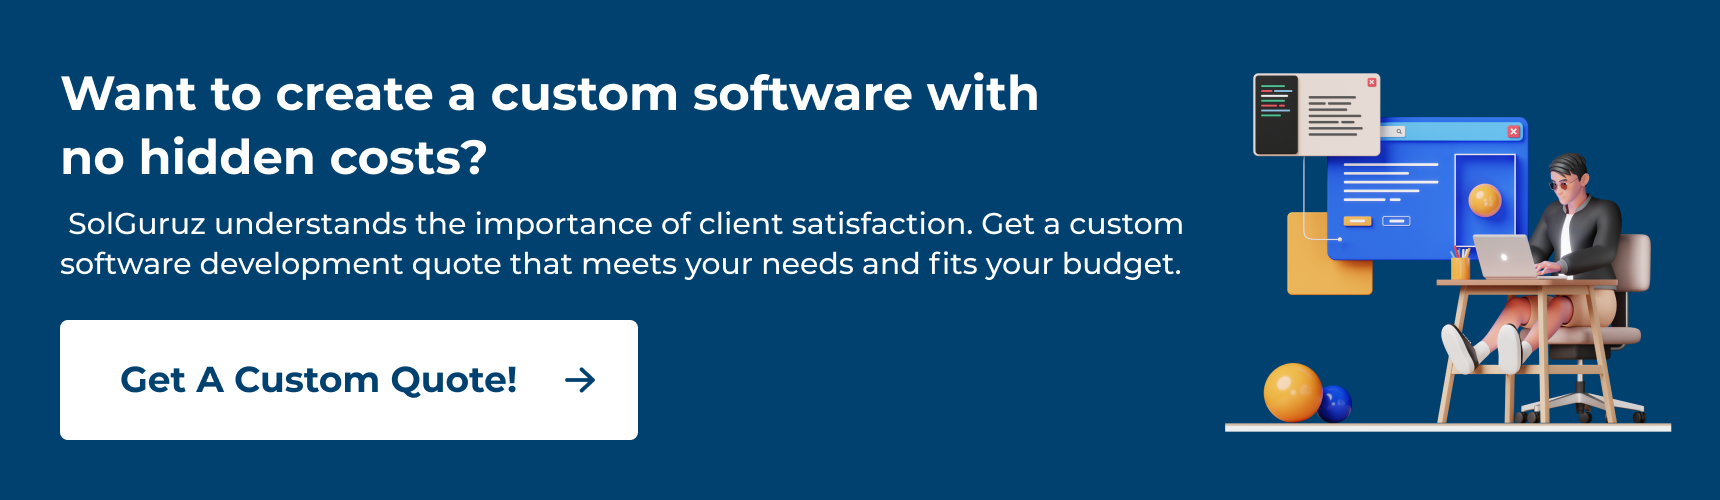 Want to create a custom software with no hidden cost? Then reach out to SolGuruz, which is a leading custom software development company in India